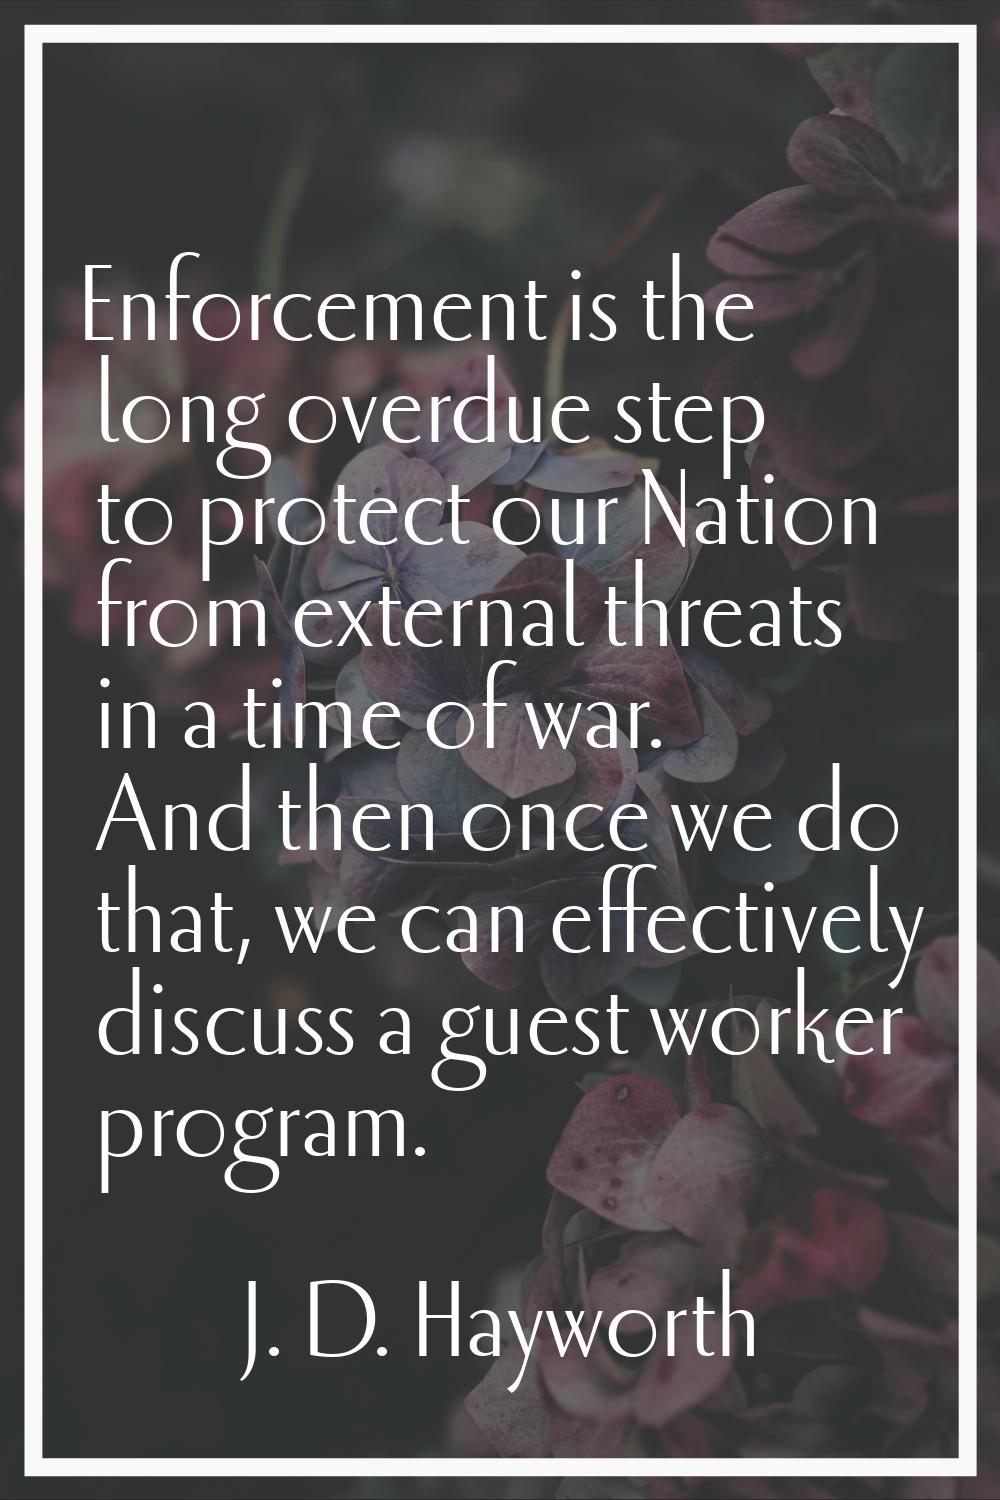 Enforcement is the long overdue step to protect our Nation from external threats in a time of war. 